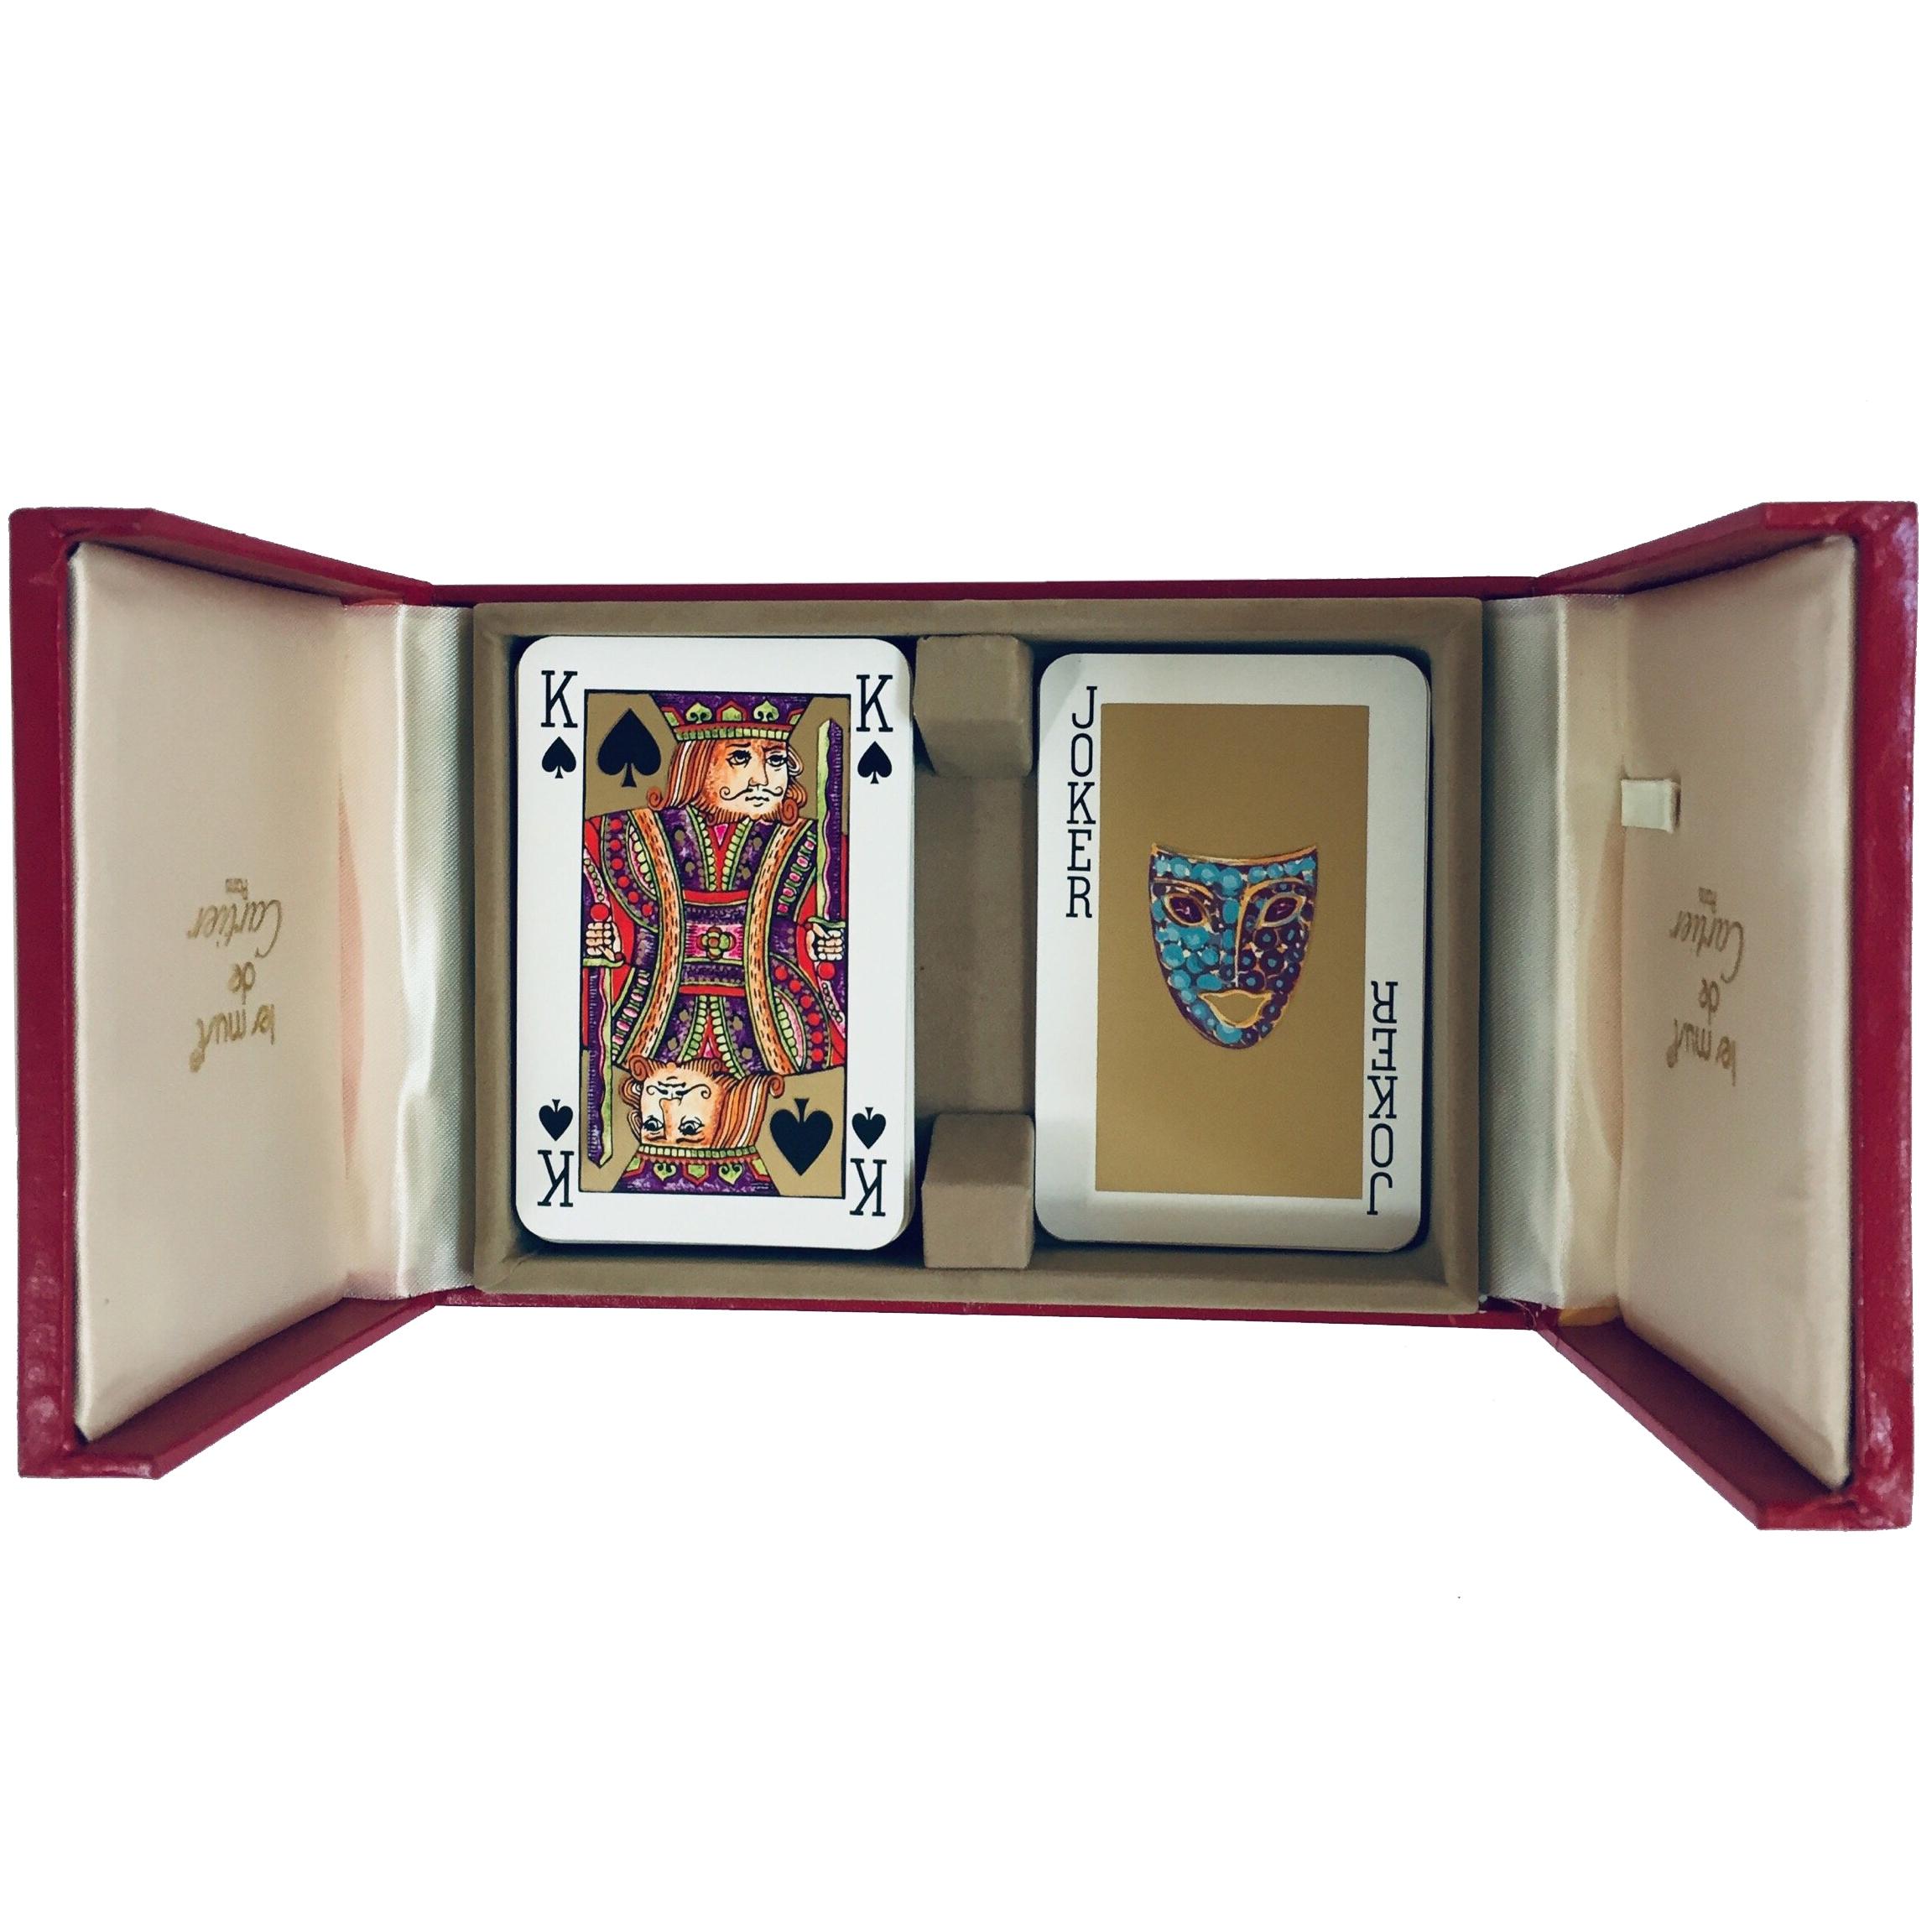 Must de Cartier Paris Vintage Playing Poker or Bridge Cards in Red Box